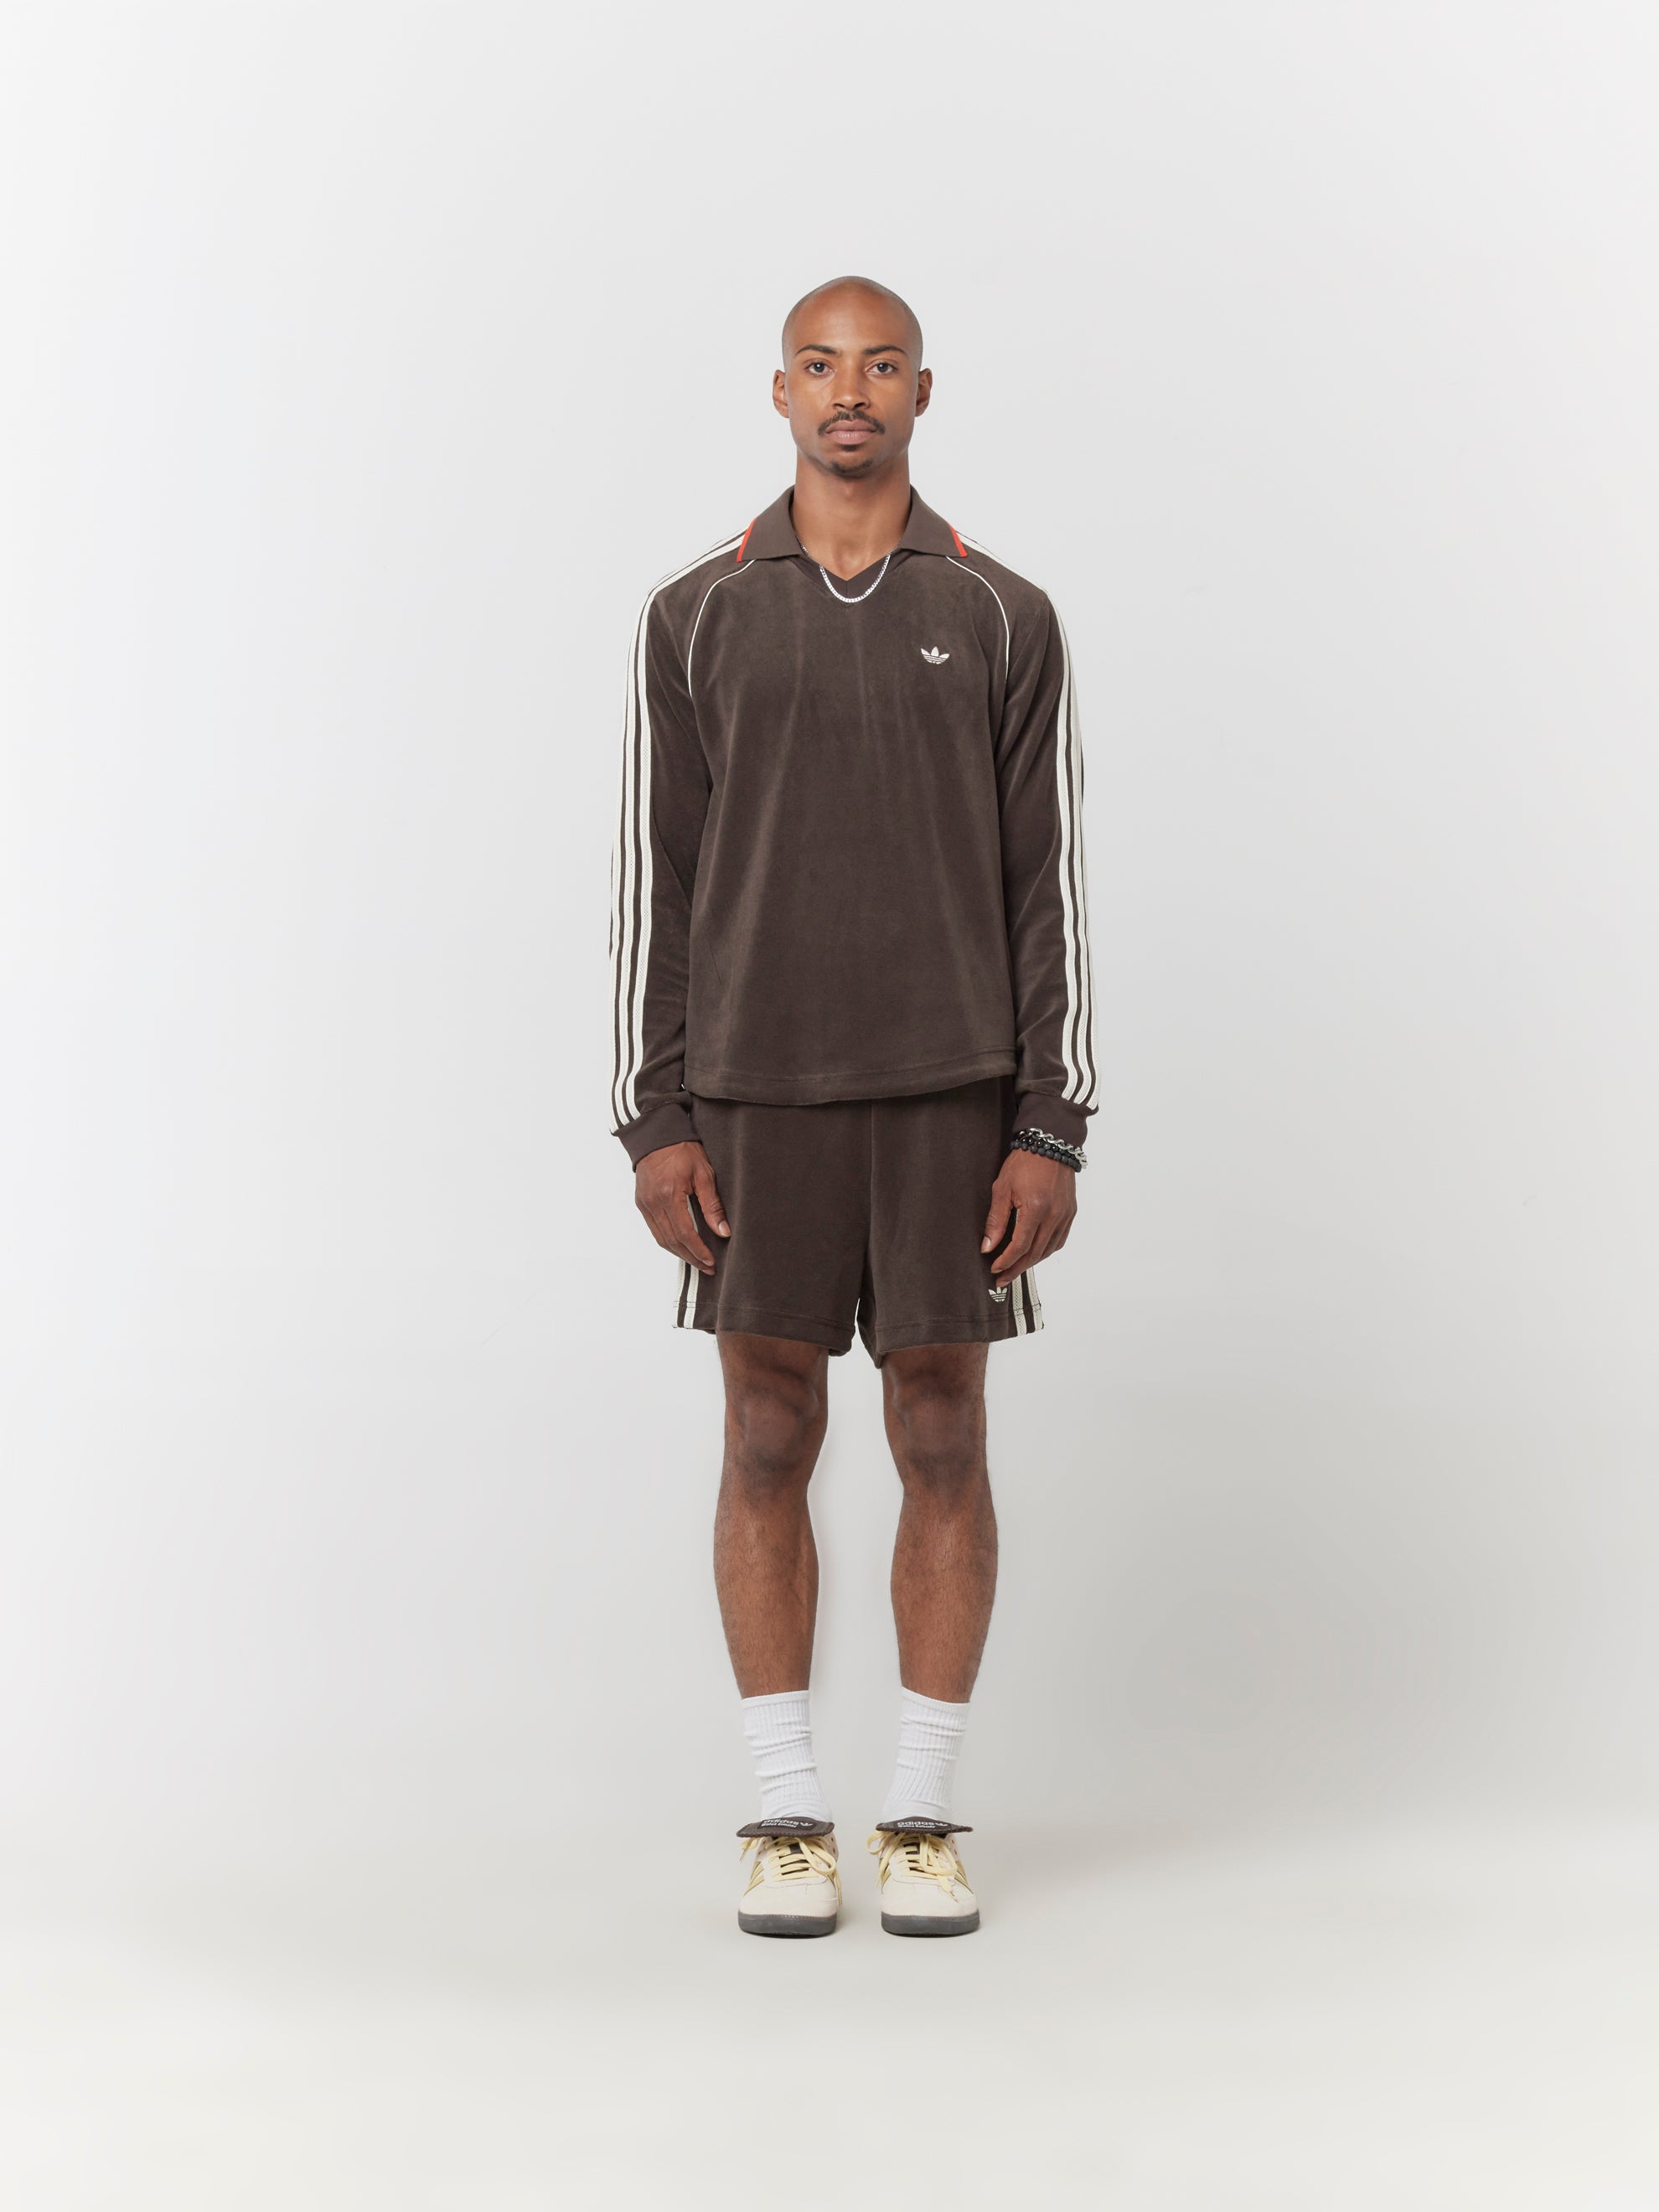 Buy Adidas Wales Bonner L/S Toweling Top Online at UNION LOS ANGELES